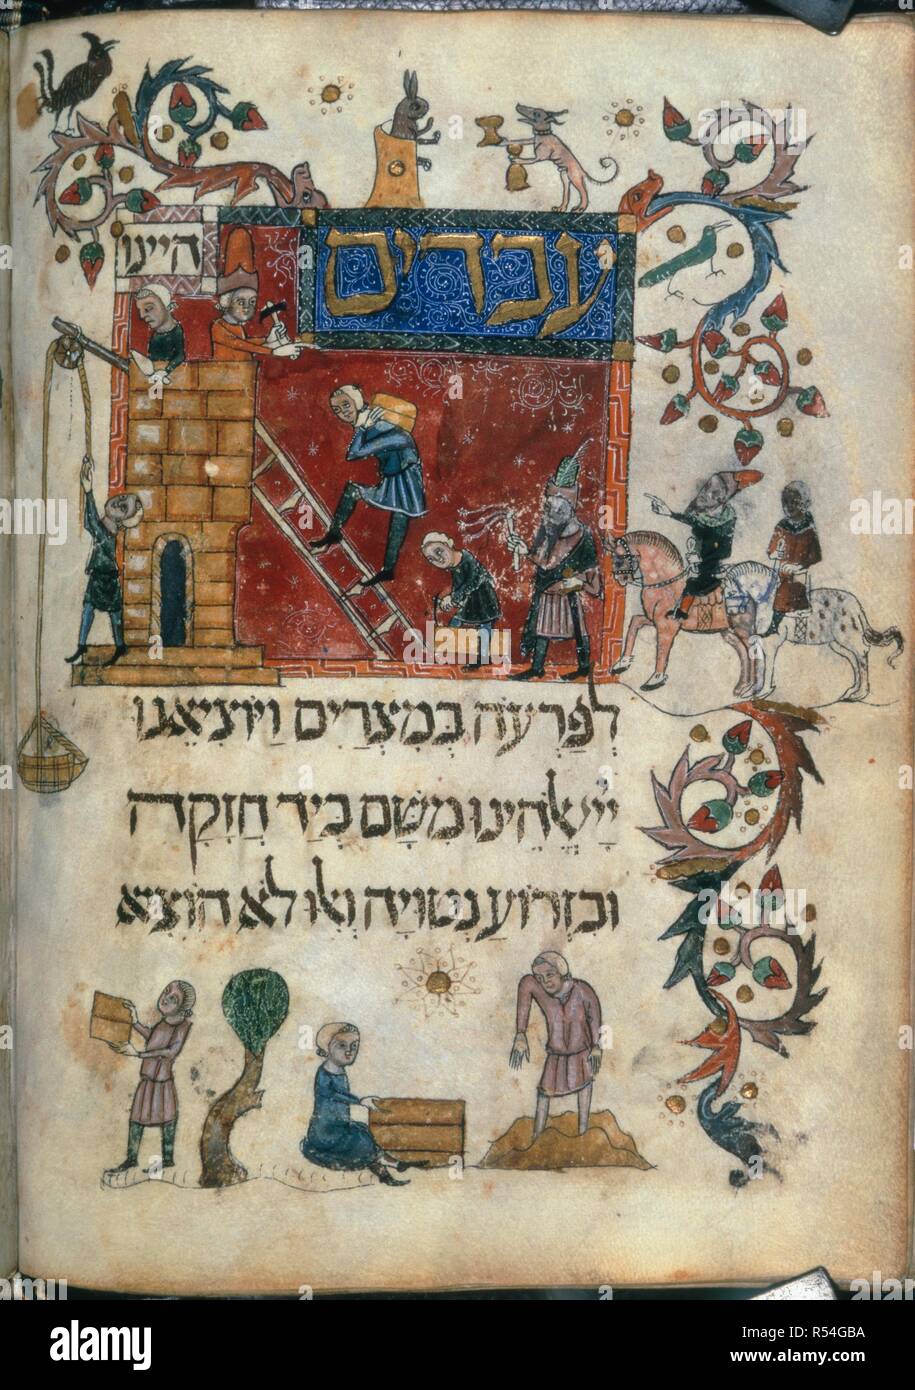 Israelites building the cities. Barcelona Haggadah. Catalonia, 14th century. Israelites building the cities.  Image taken from Barcelona Haggadah.  Originally published/produced in Catalonia, 14th century. . Source: Add. 14761, f.30v. Language: Hebrew. Stock Photo